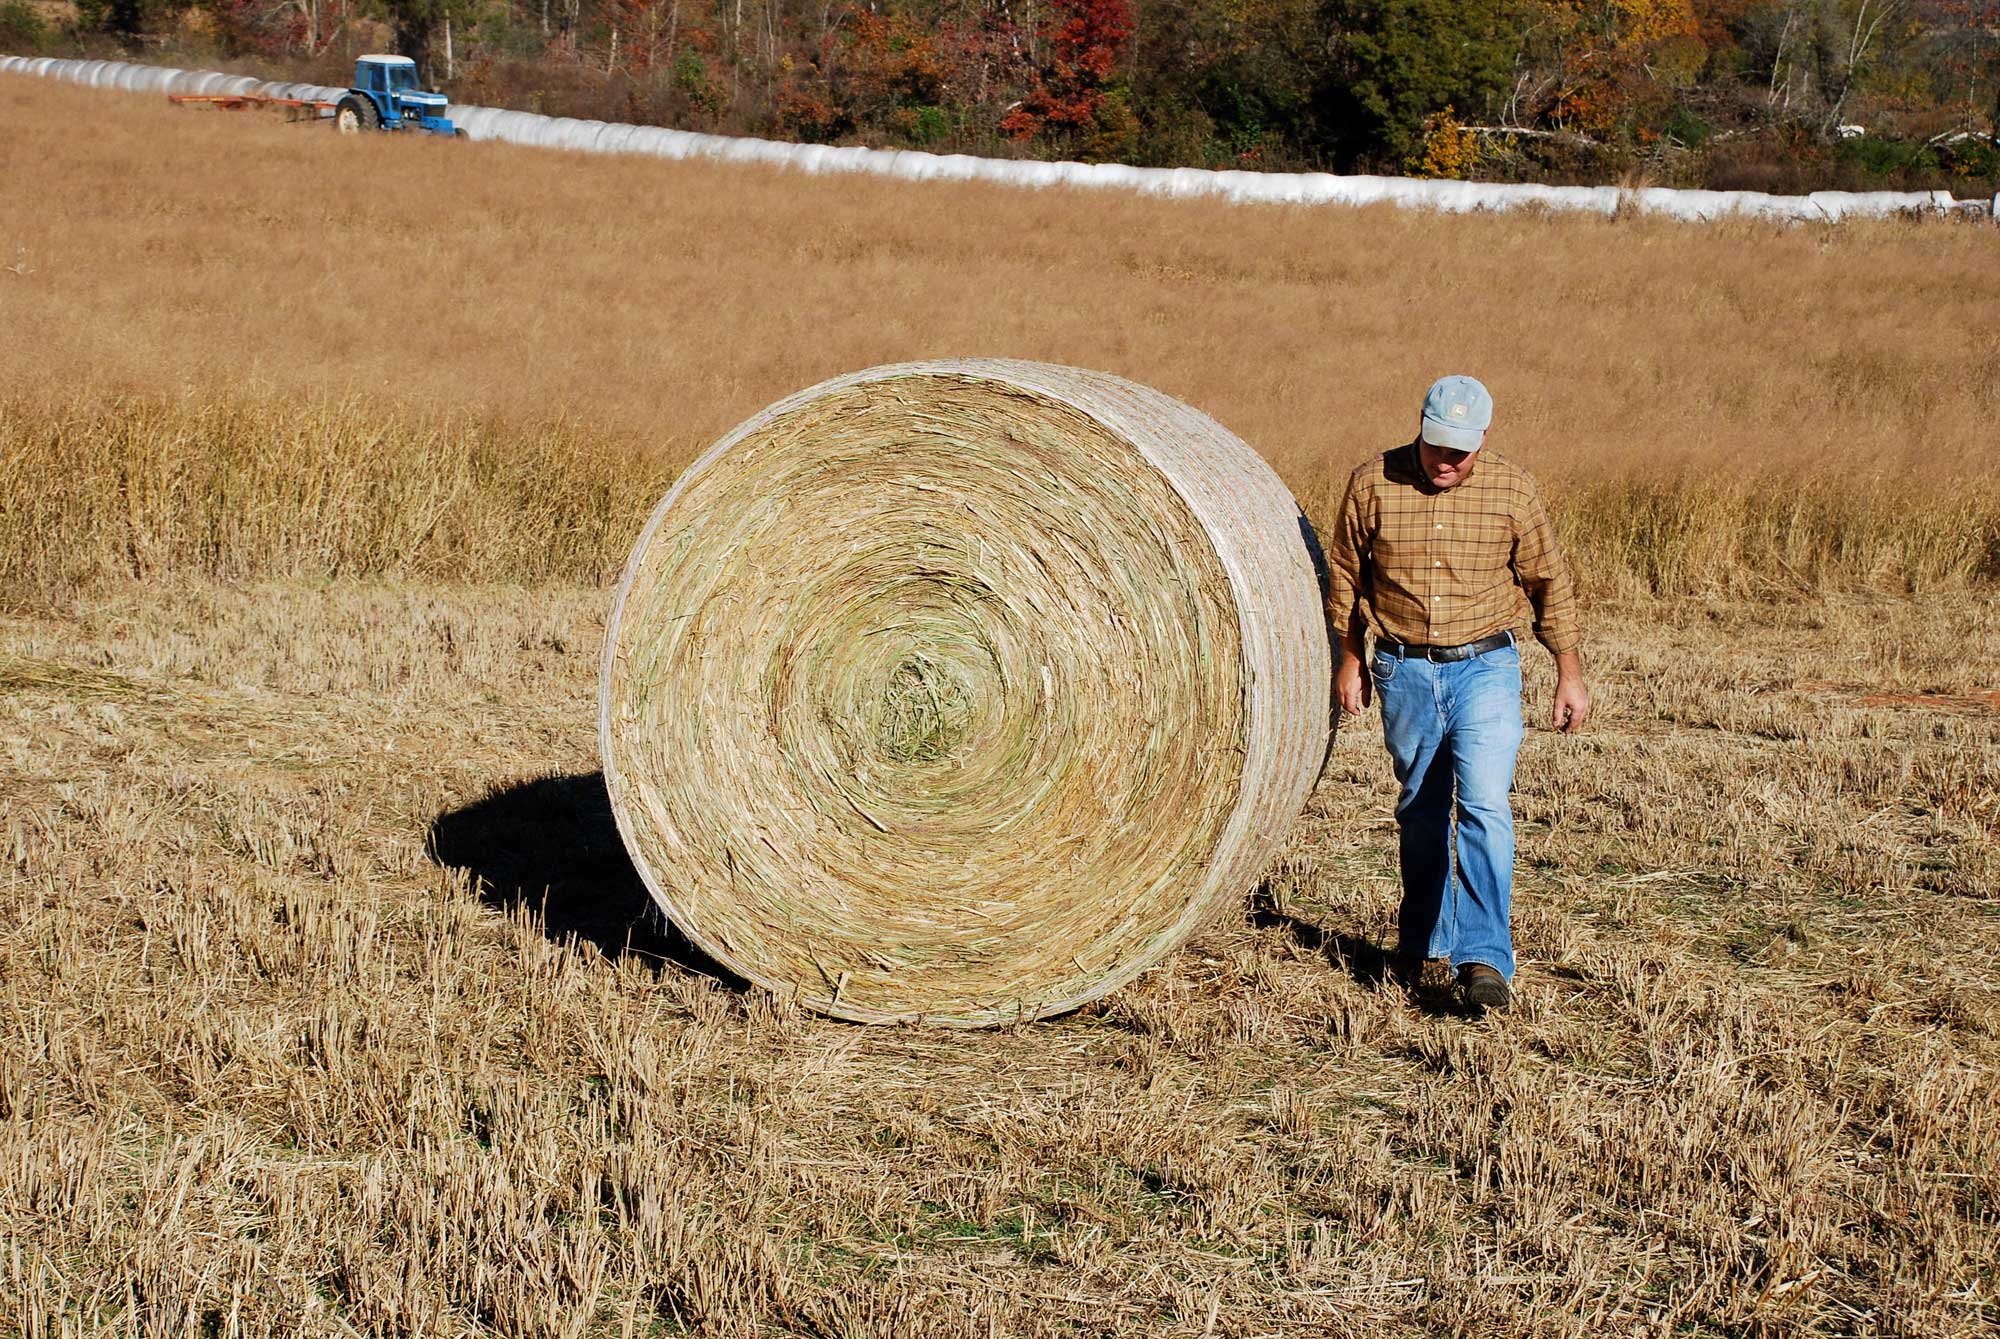 Photograph of a field of switchgrass that has been partially harvested. In the foreground, a man walks next to a round bale of yellowish switchgrass. In the background, a blue tractor can be seen cutting switchgrass.